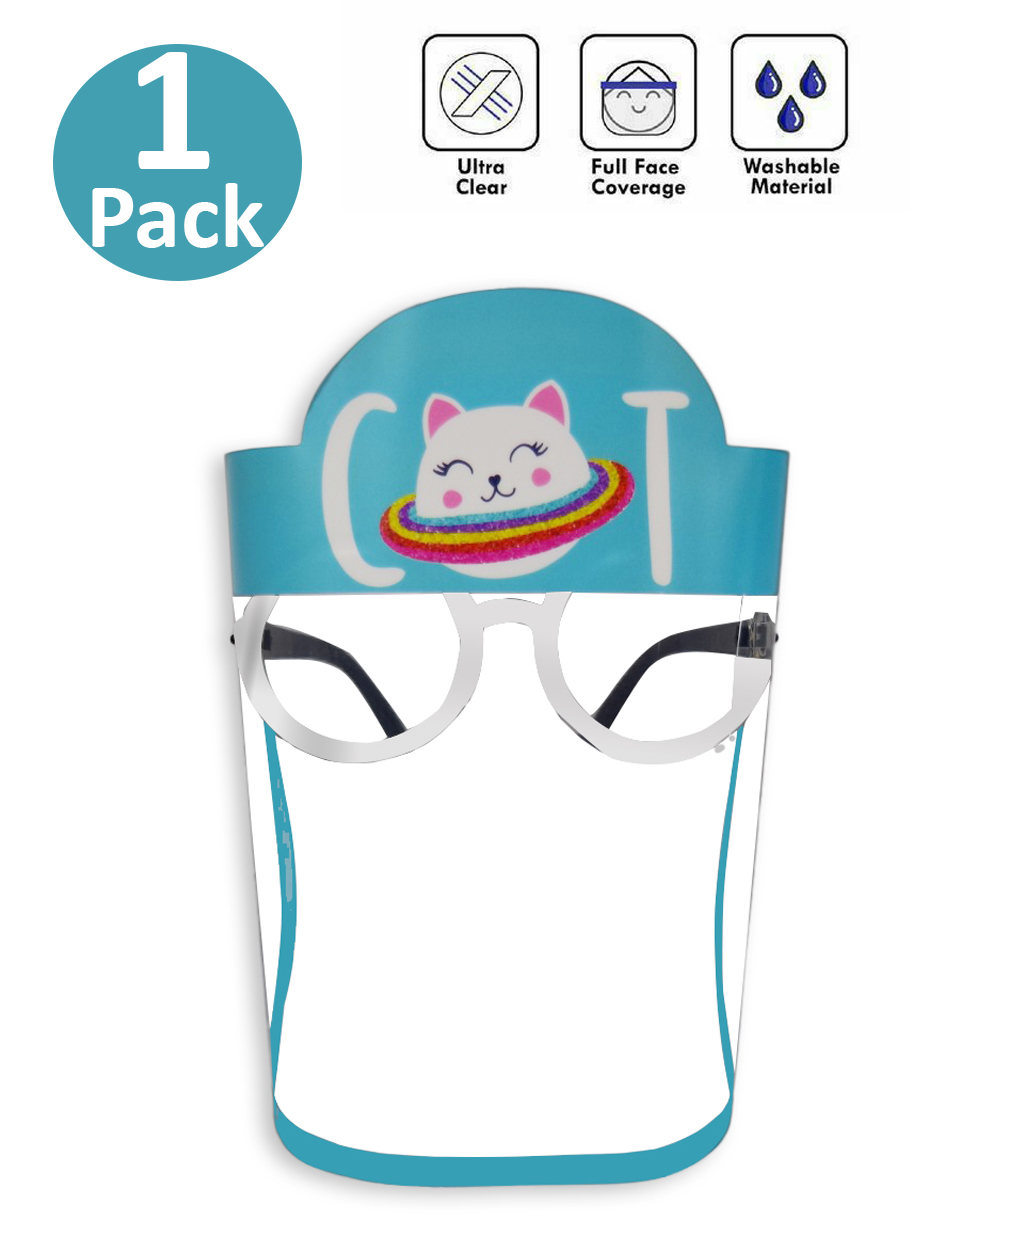 1 Pack Disposable Sunscreen Sung Safety Face Shield Reusable Transparent Adjustable Recyclable Anti-Fog Face Cover Washable Protector For Kids Unisex Shield Children Boys Girls Anti-fog Clear Visor - image 1 of 3